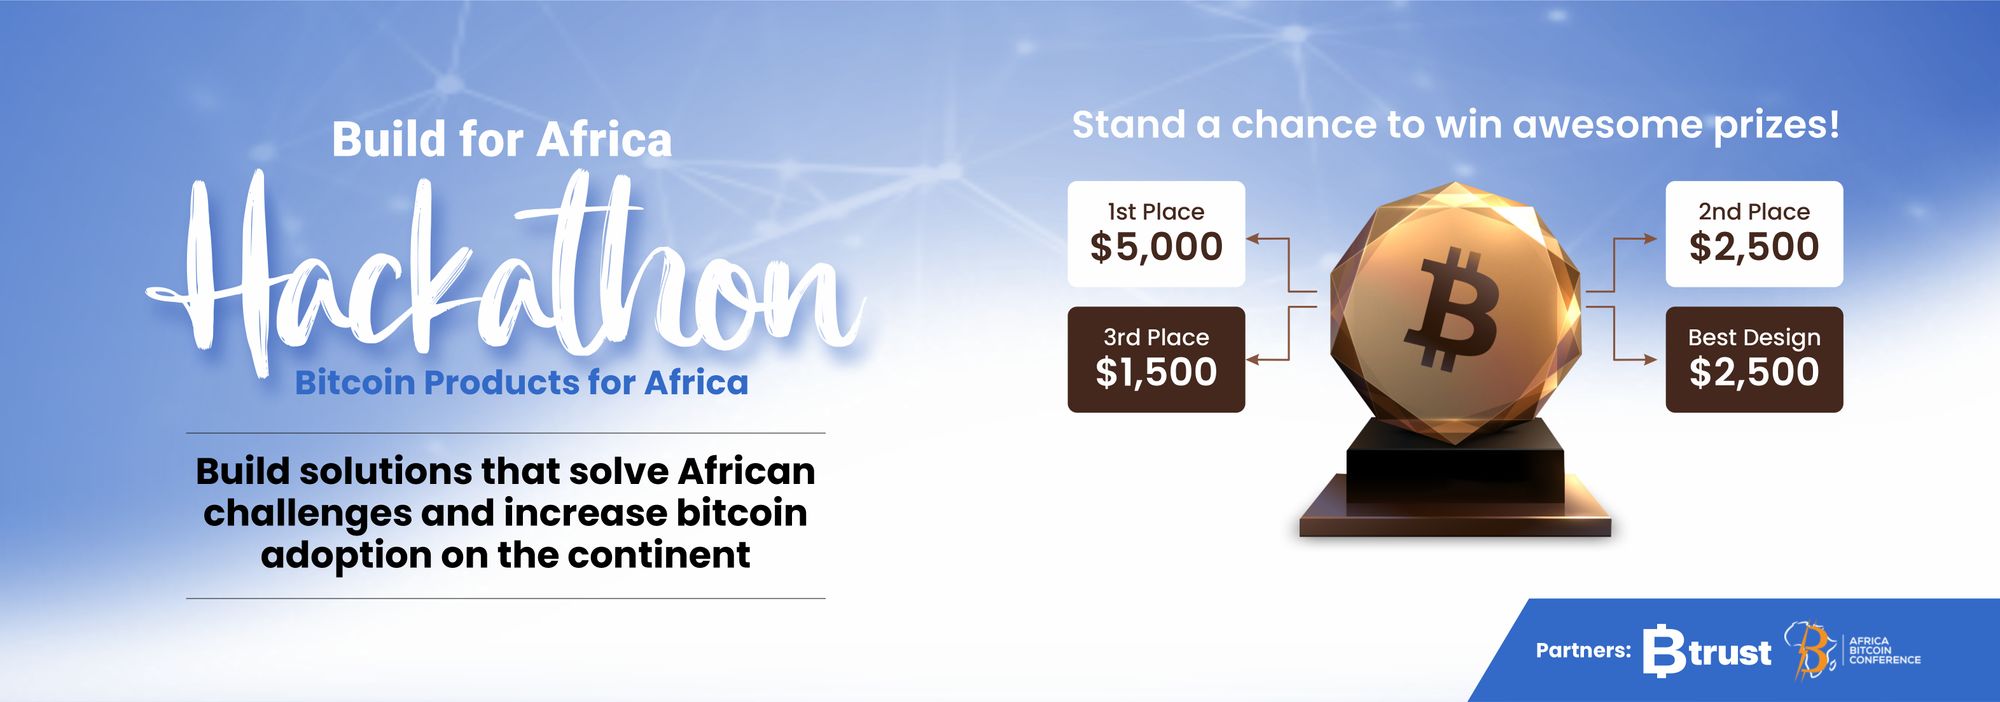 The Build for Africa Hackathon: Tips for Choosing the Right Idea